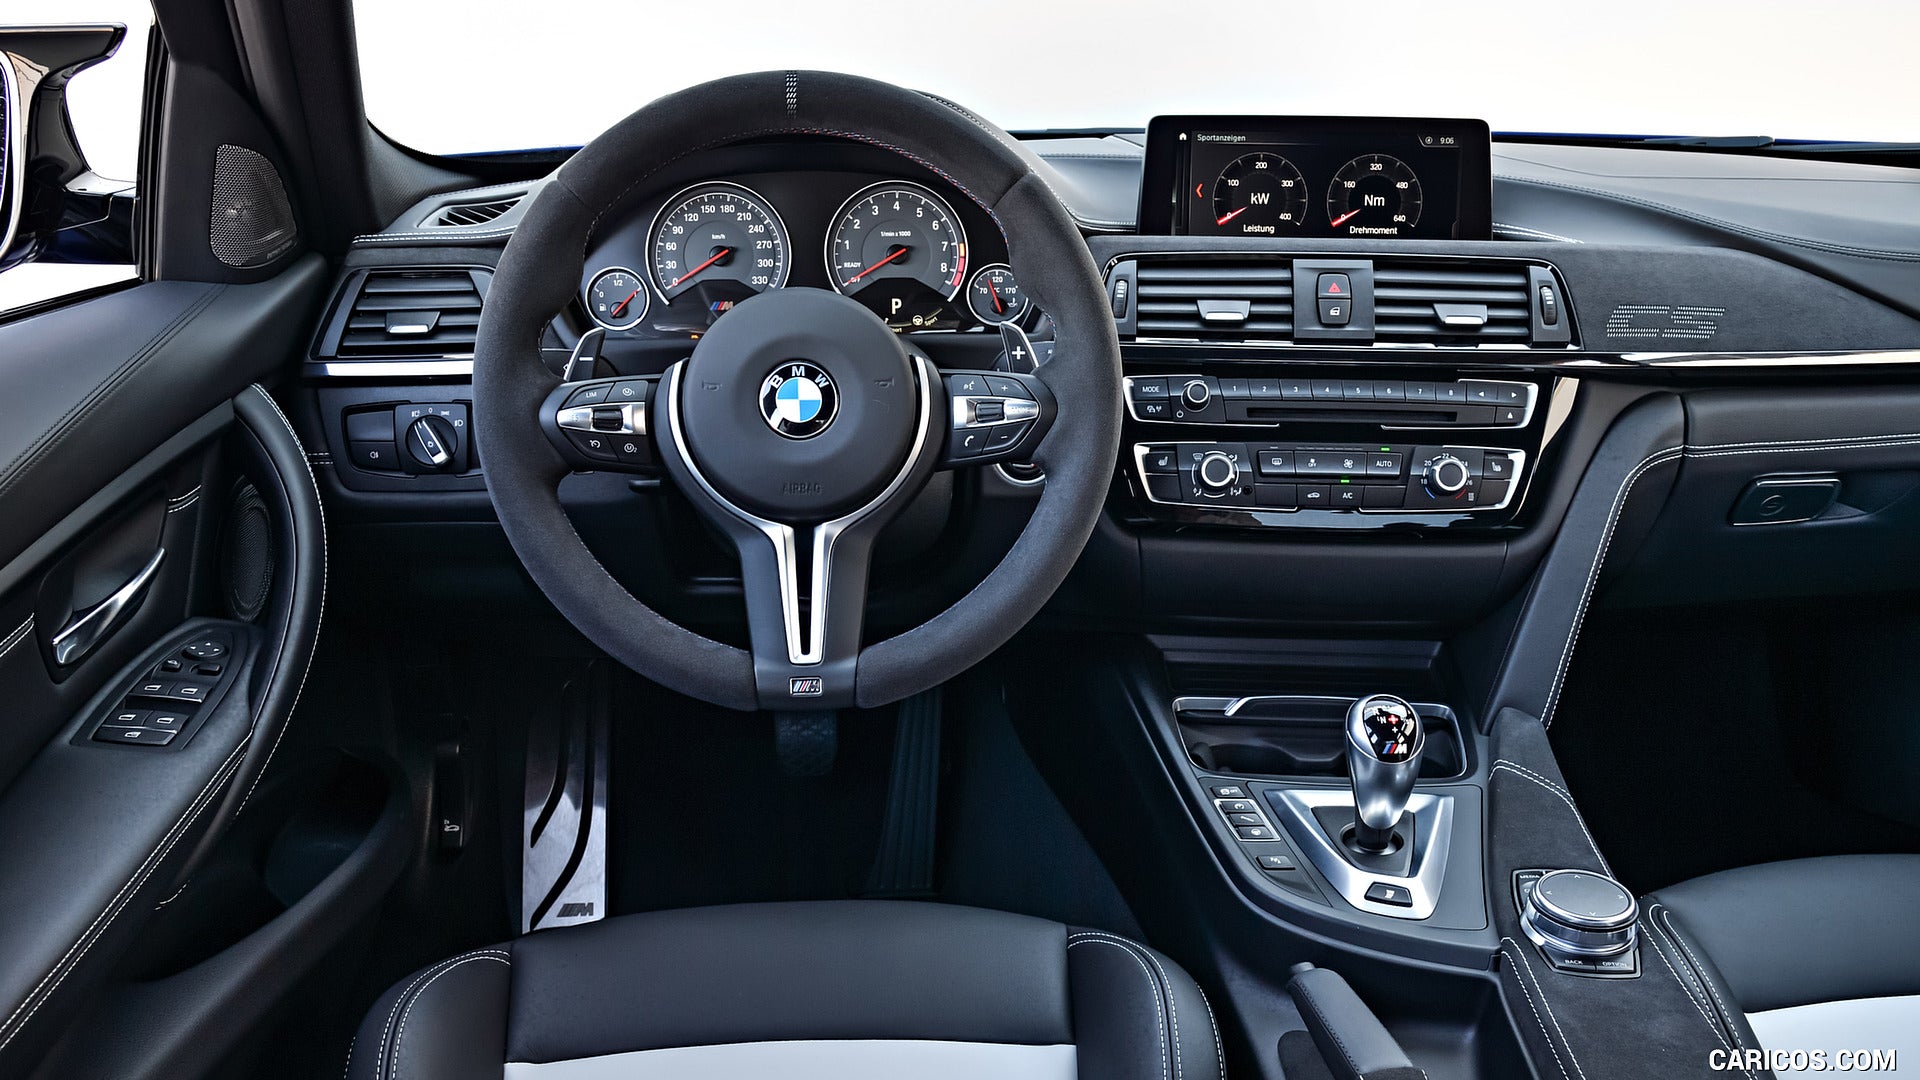 MODE DCT Paddles Alloy Paddle Shifters suits BMW F-Series M2/M3/M4/M5/M6 & X5M/X6M - MODE Auto Concepts